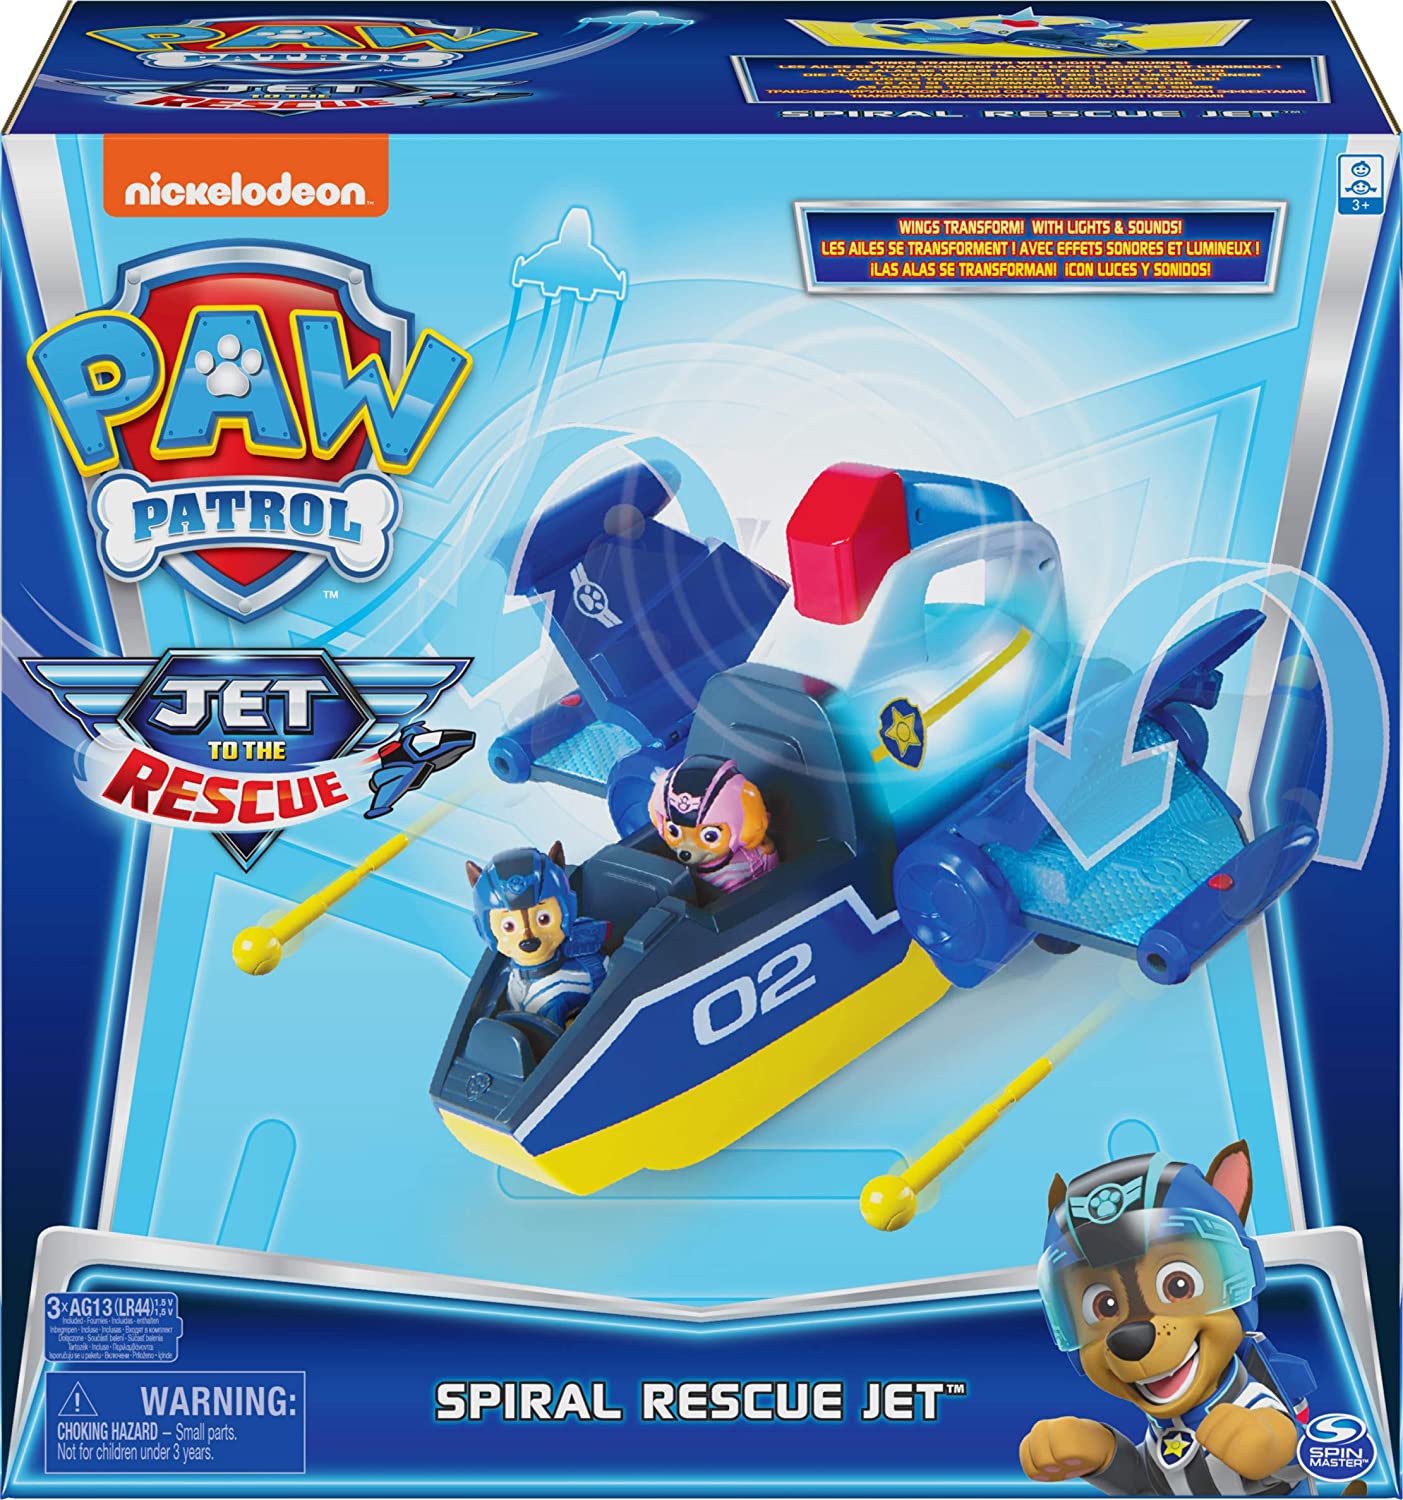 Paw Patrol Jet to The Rescue Deluxe Transforming Spiral Rescue Jet w/ Lights & Sounds $18.05 + Free Shipping w/ Amazon Prime or Orders $25+